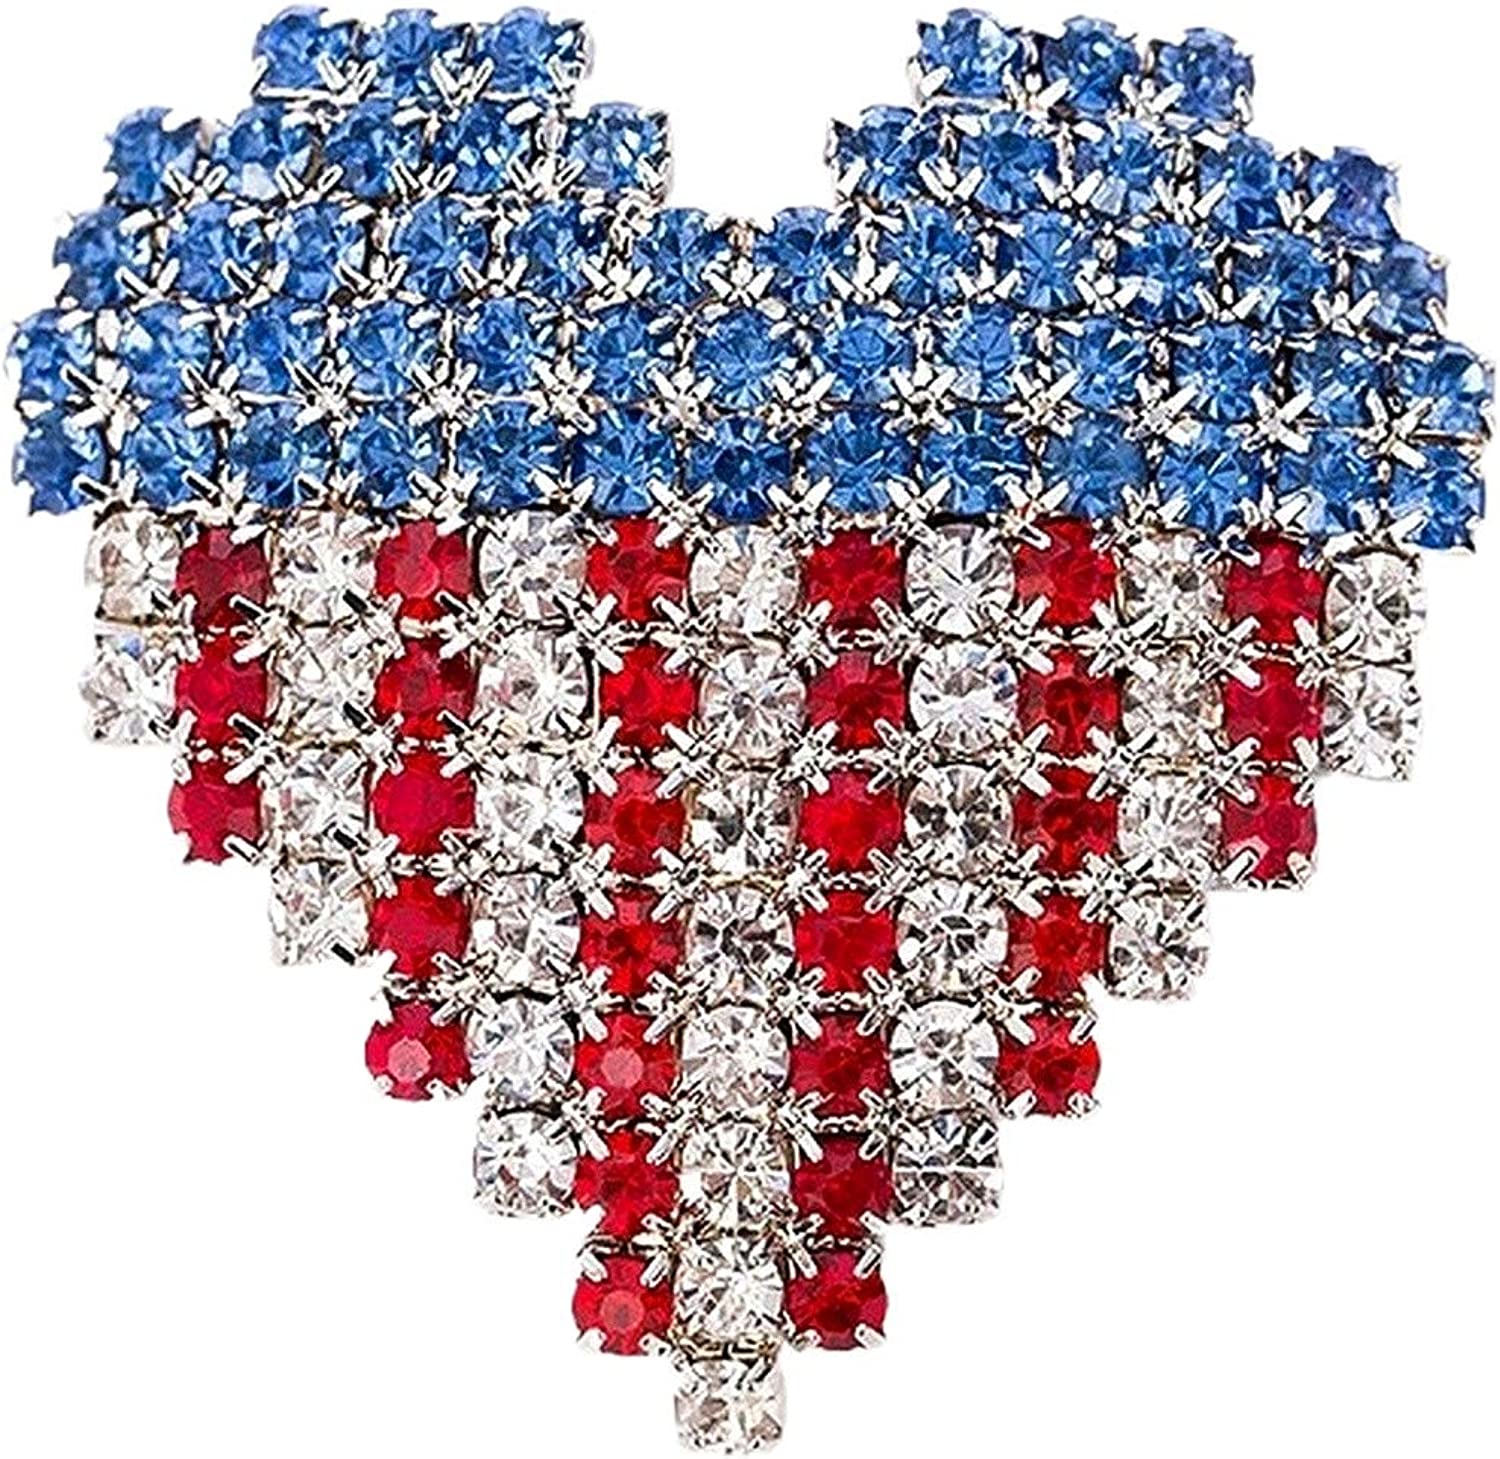 Colorful clouds Brooch Pins American Flag Patriotic Crystal Rhinestone Heart Lapel Brooches Fashion Broches Jewelry for Women,Blue